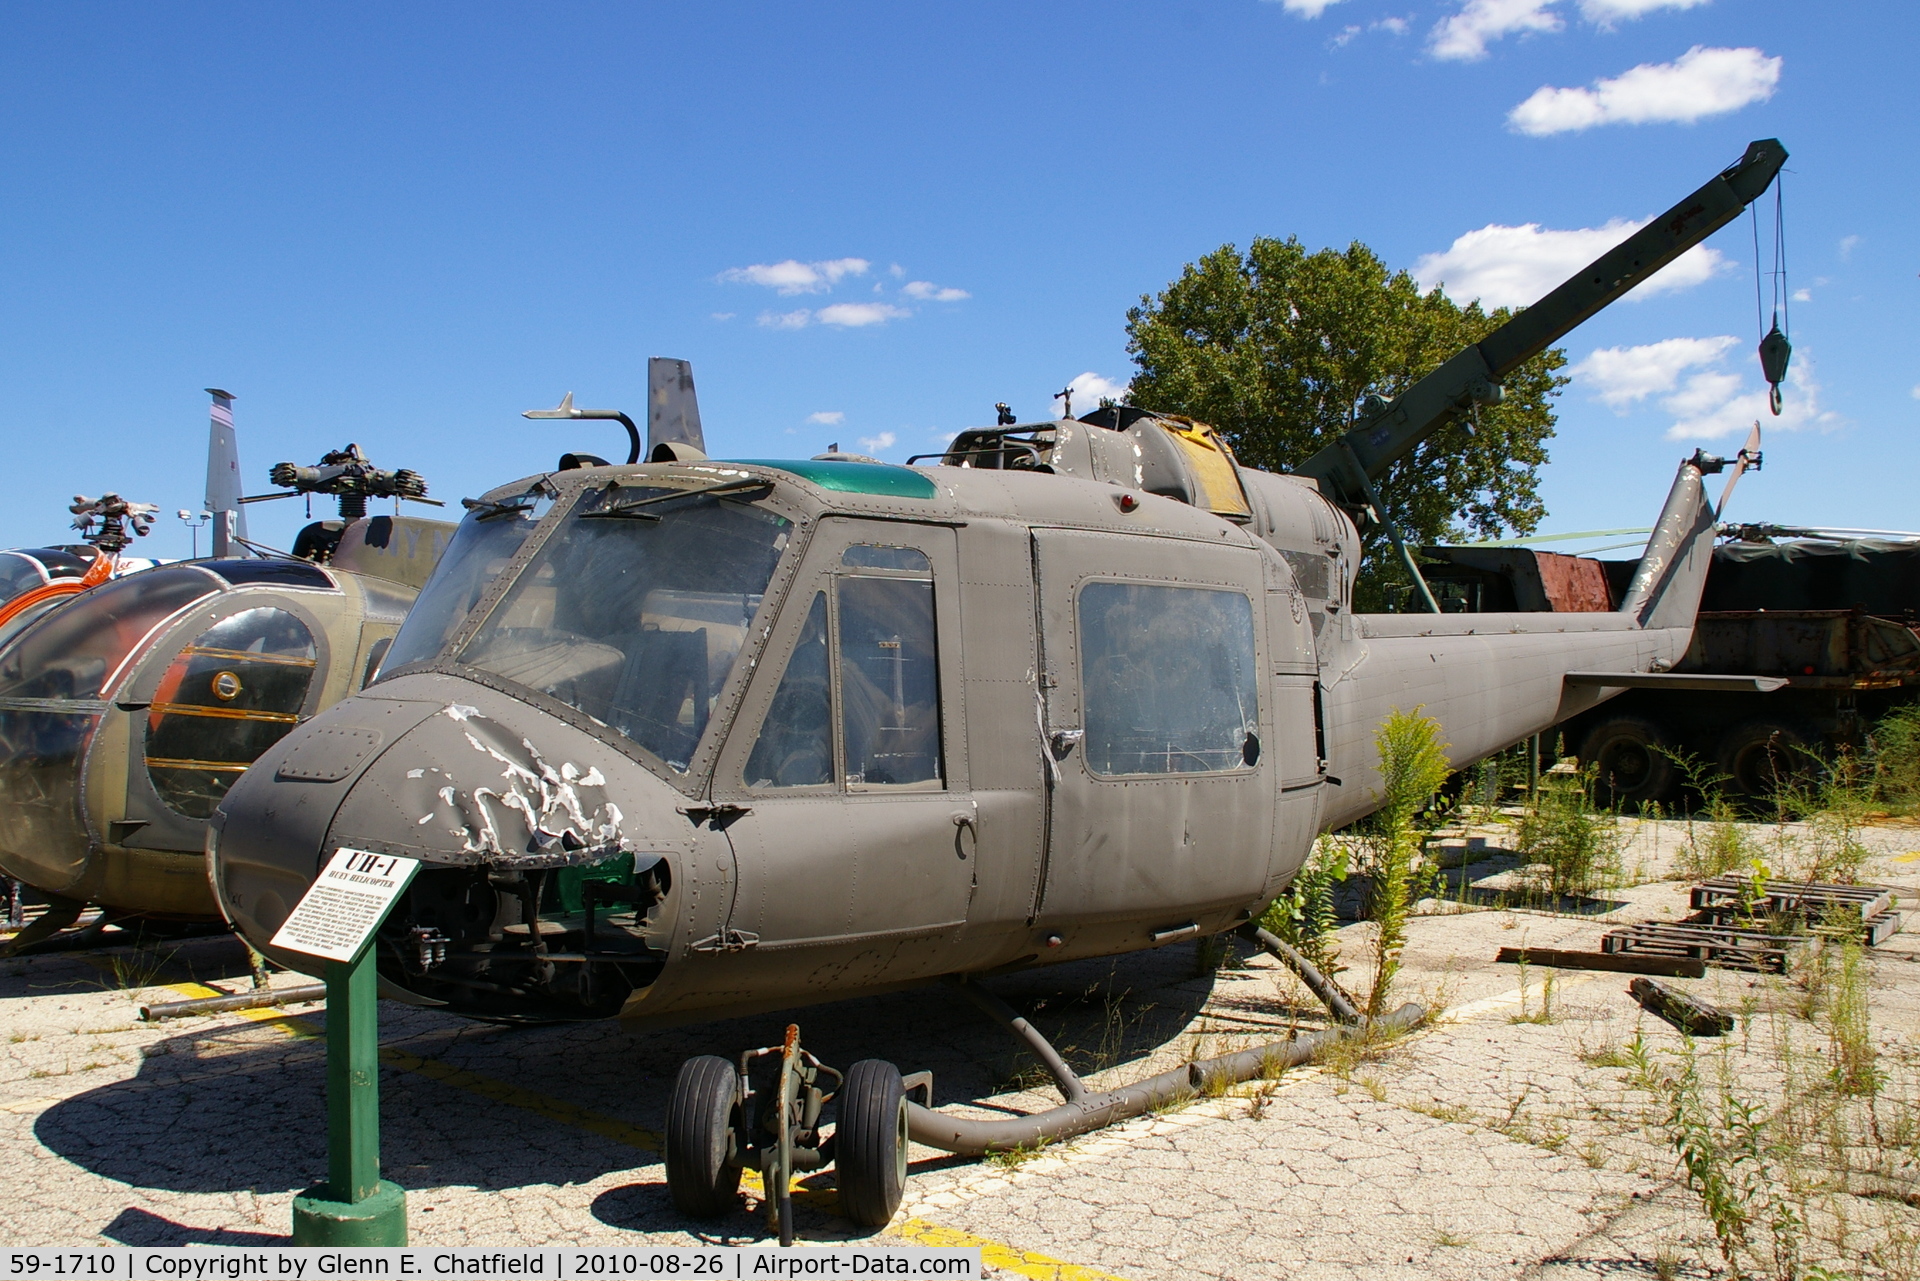 59-1710, 1959 Bell UH-1A Iroquois C/N 169, Bad shape, but preserved nevertheless.  Combat veteran